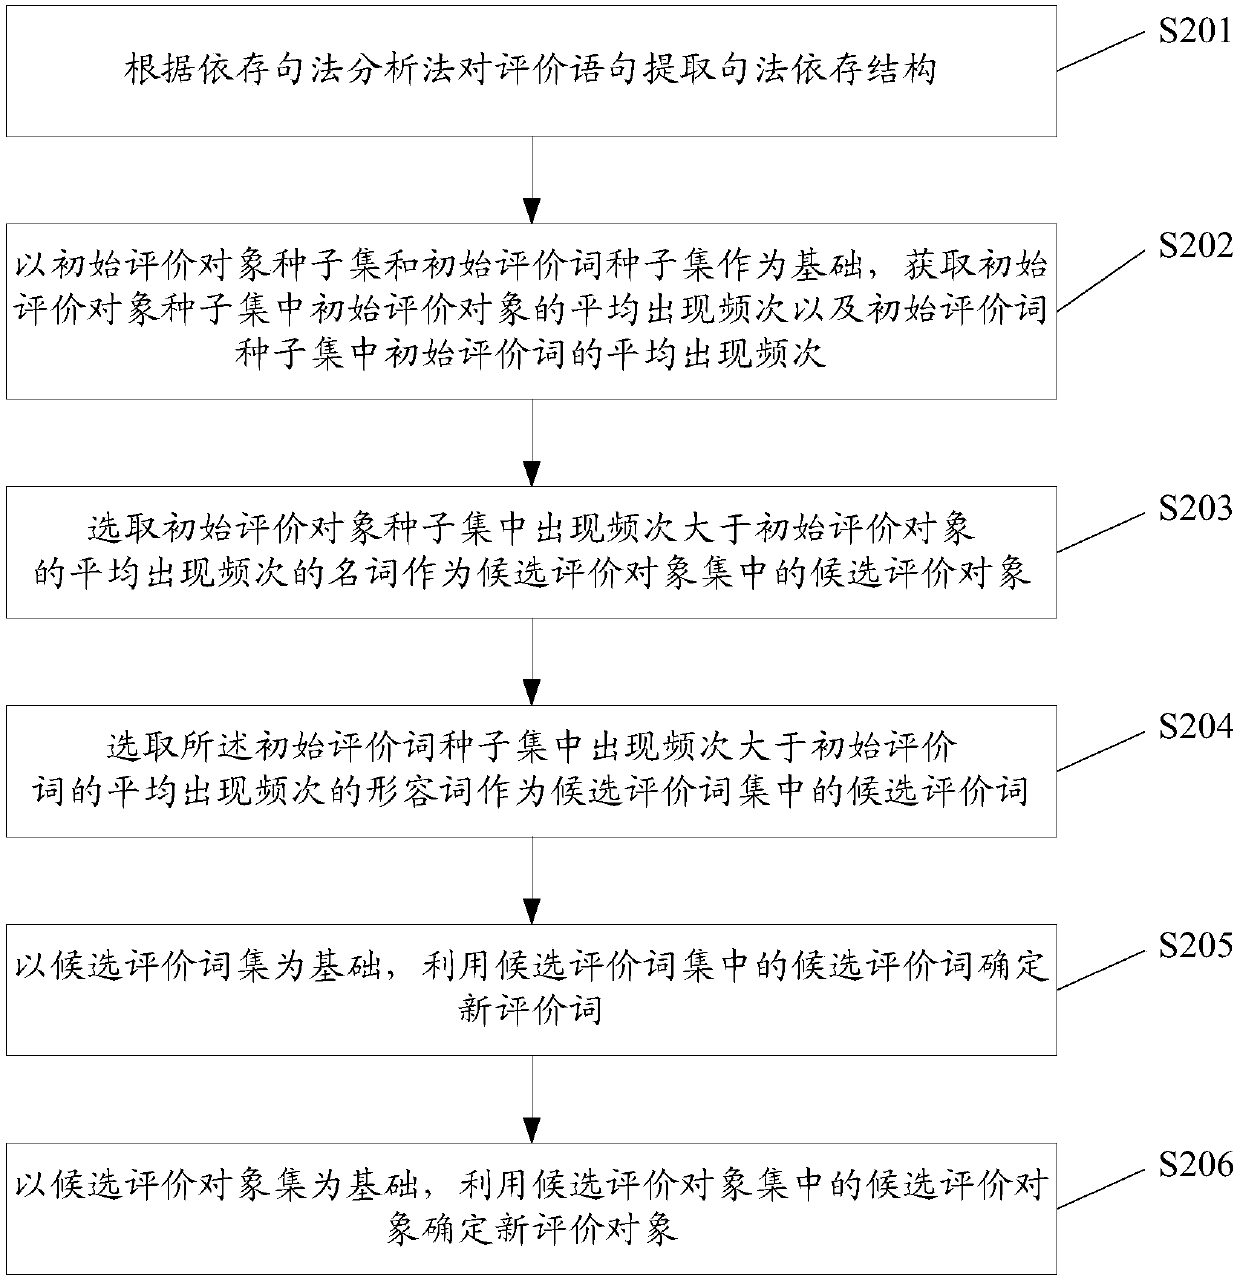 Fine granularity evaluation information mining method and system